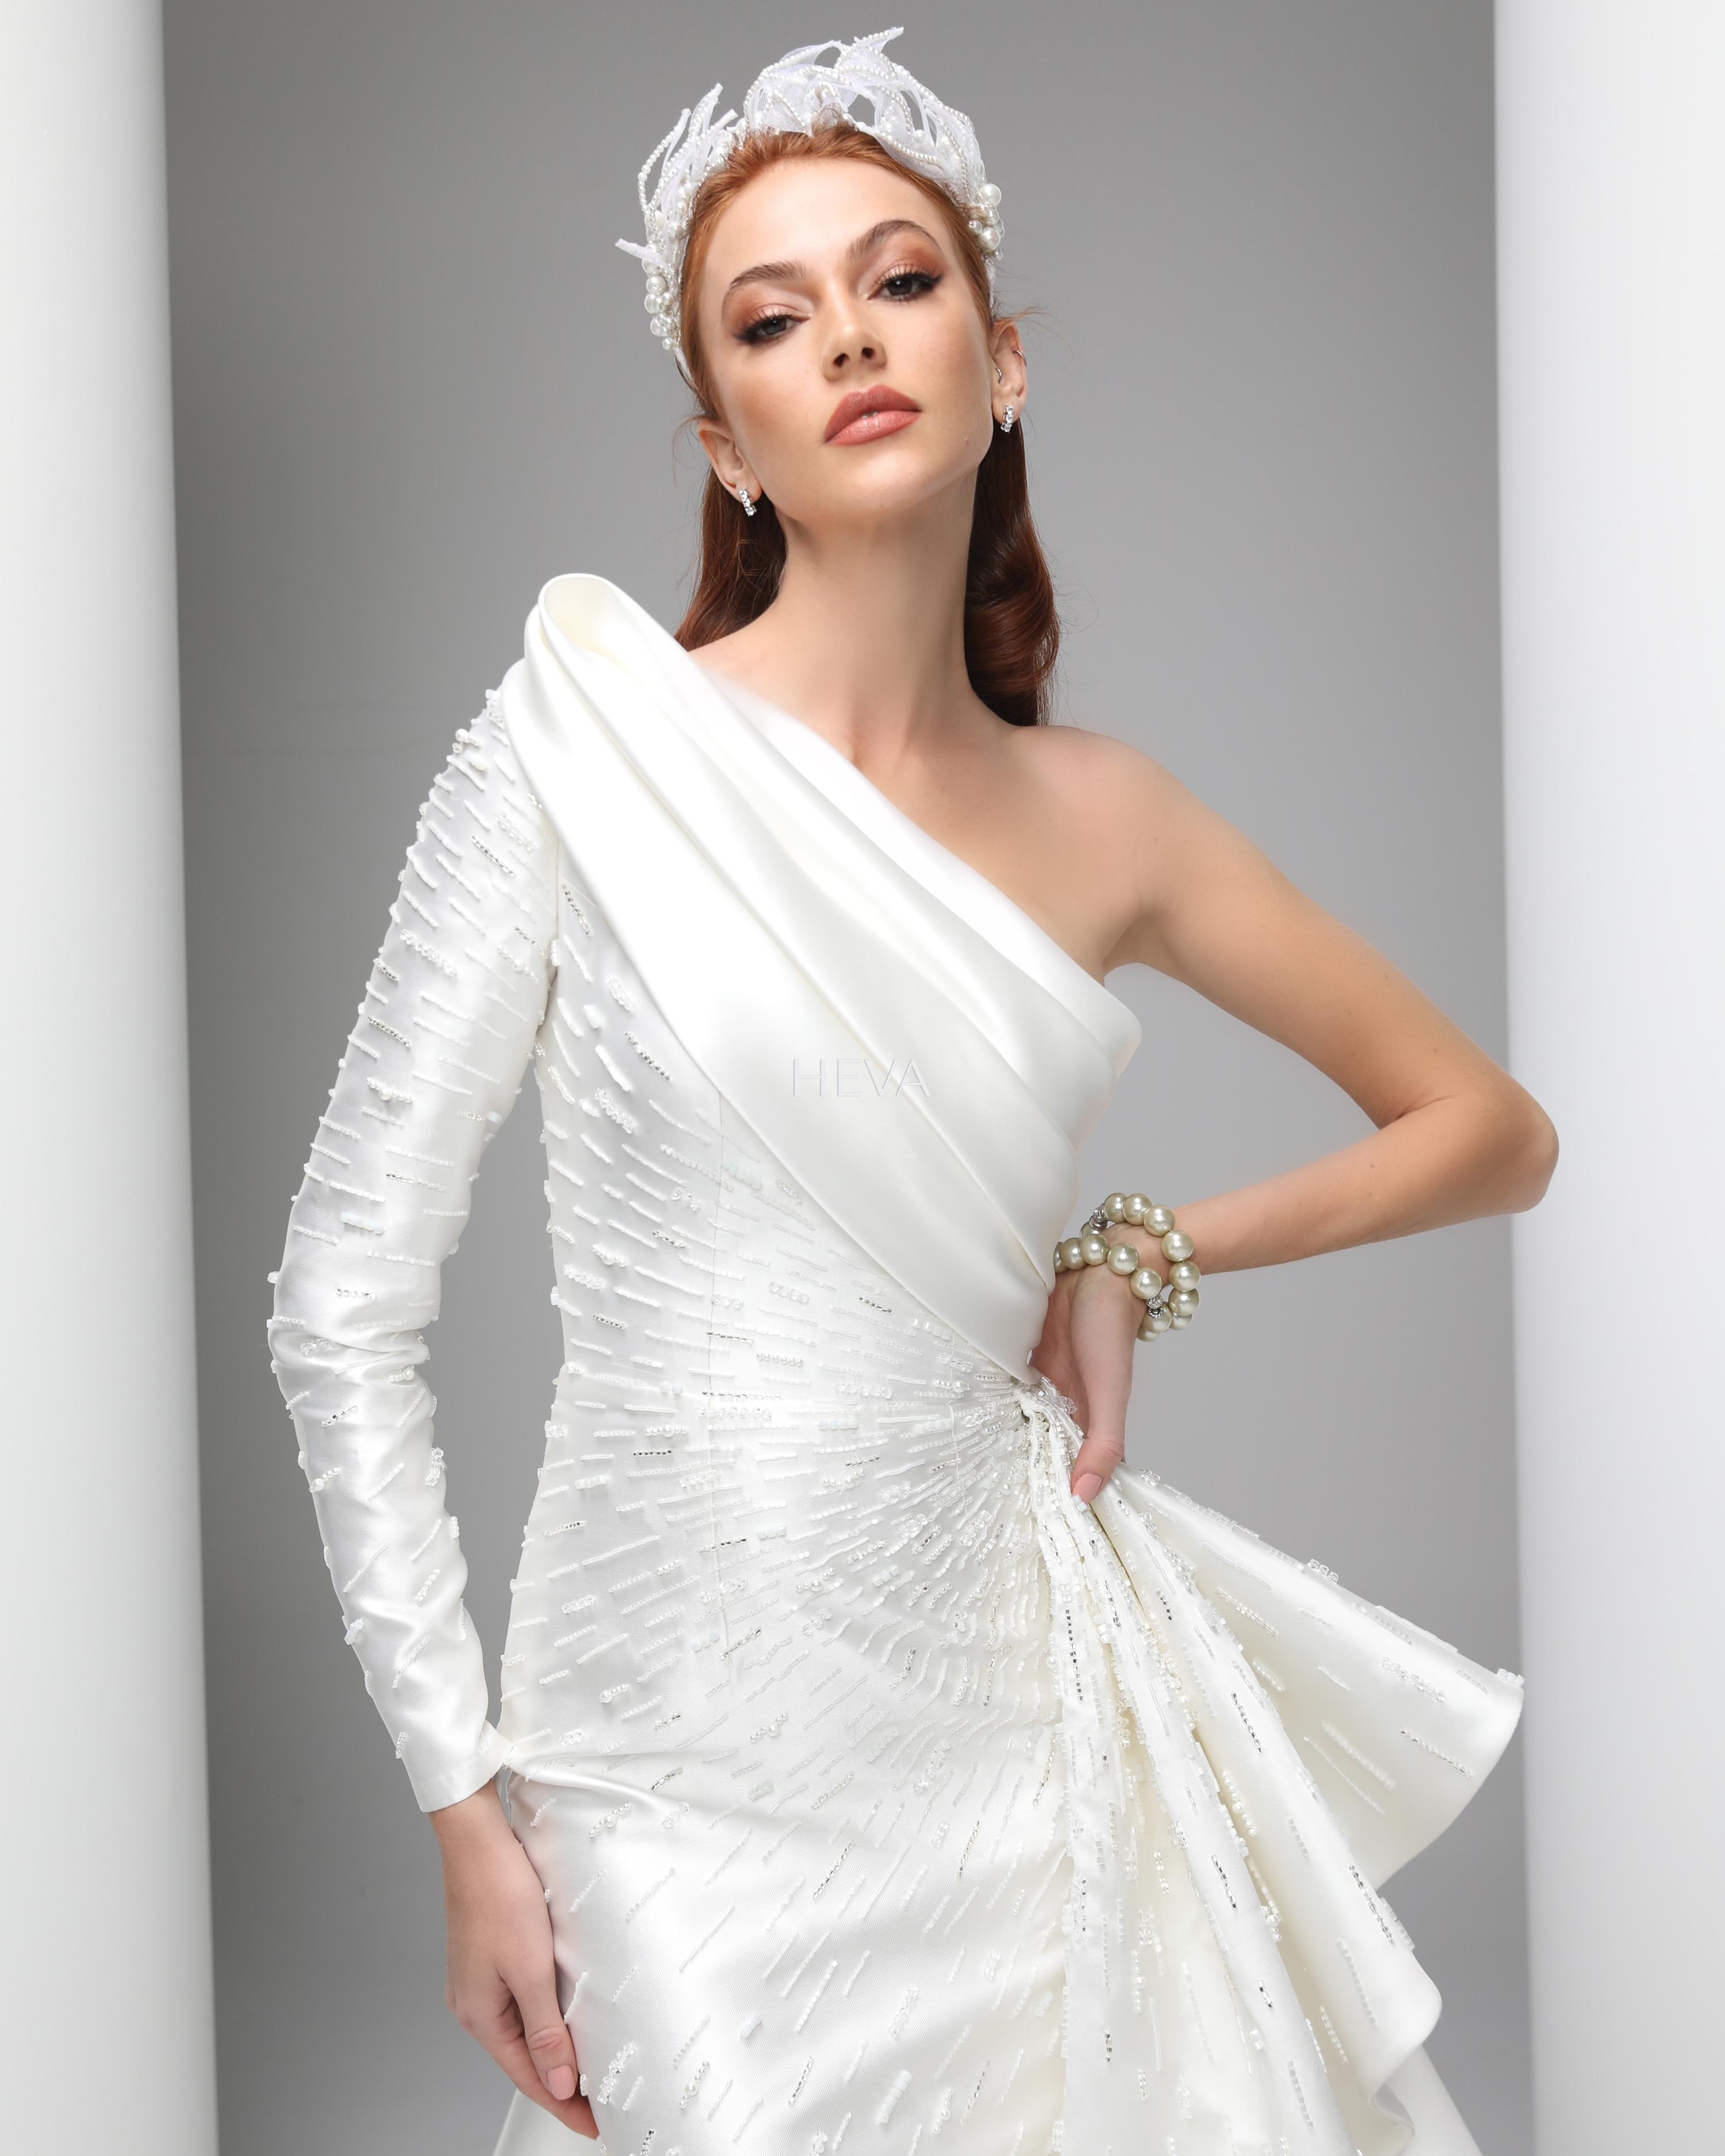 HV22010 - Asymmetrical Tail, One-Shoulder, One-Sleeved, Custom-Designed Wedding Gown with Draped Neckline and Fully Hand-Embroidered Crystal Stones in a Fishtail Model, Made of Silk Ziberline Fabric